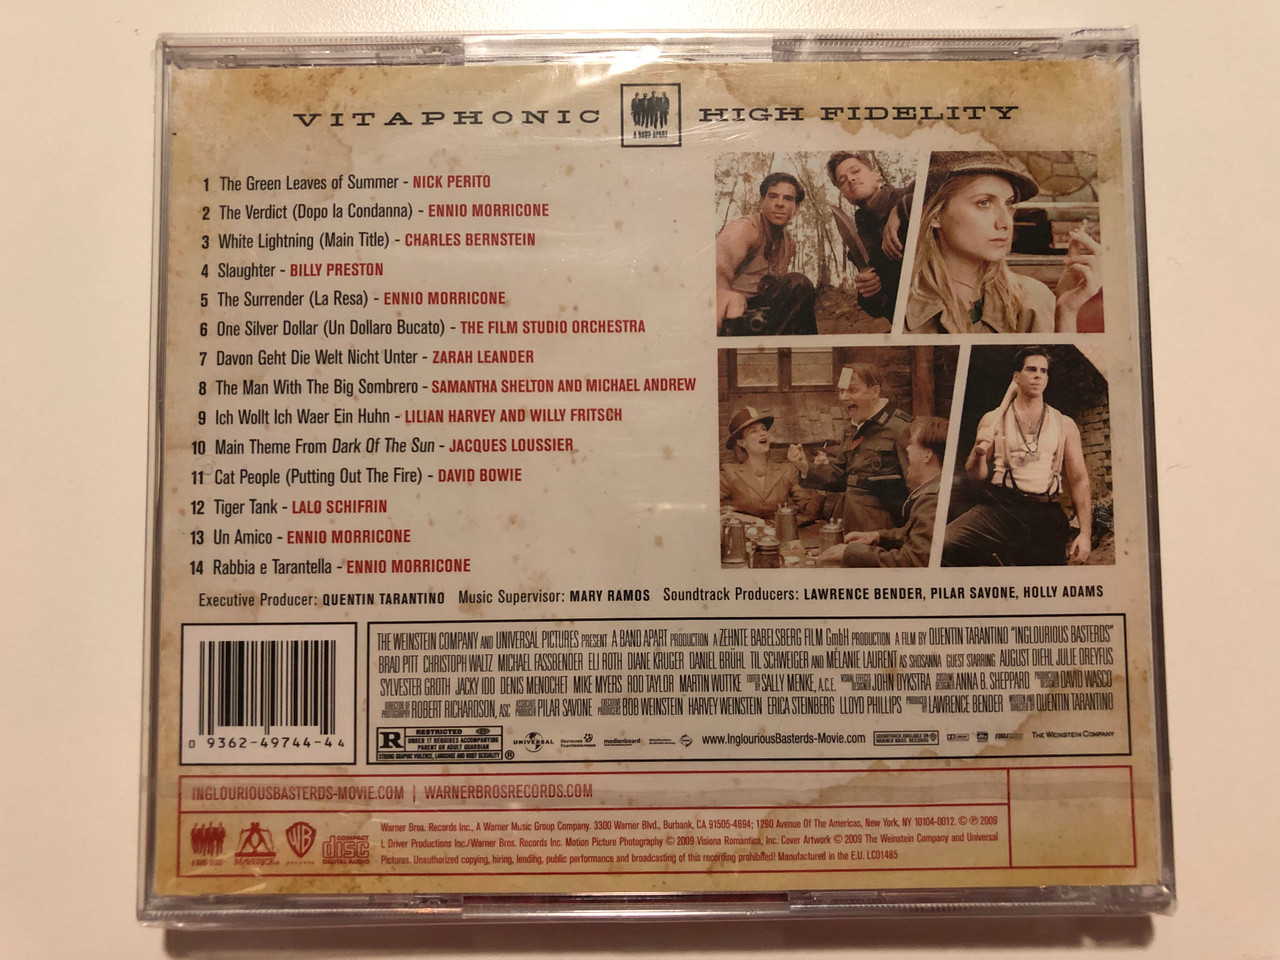 https://cdn10.bigcommerce.com/s-62bdpkt7pb/products/29765/images/177253/Quentin_Tarantinos_Inglourious_Basterds_Motion_Picture_Soundtrack_A_Band_Apart_Audio_CD_2009_9362-49744-4_2__50593.1620029713.1280.1280.JPG?c=2&_ga=2.202148306.2142011239.1620029029-598537477.1620029029